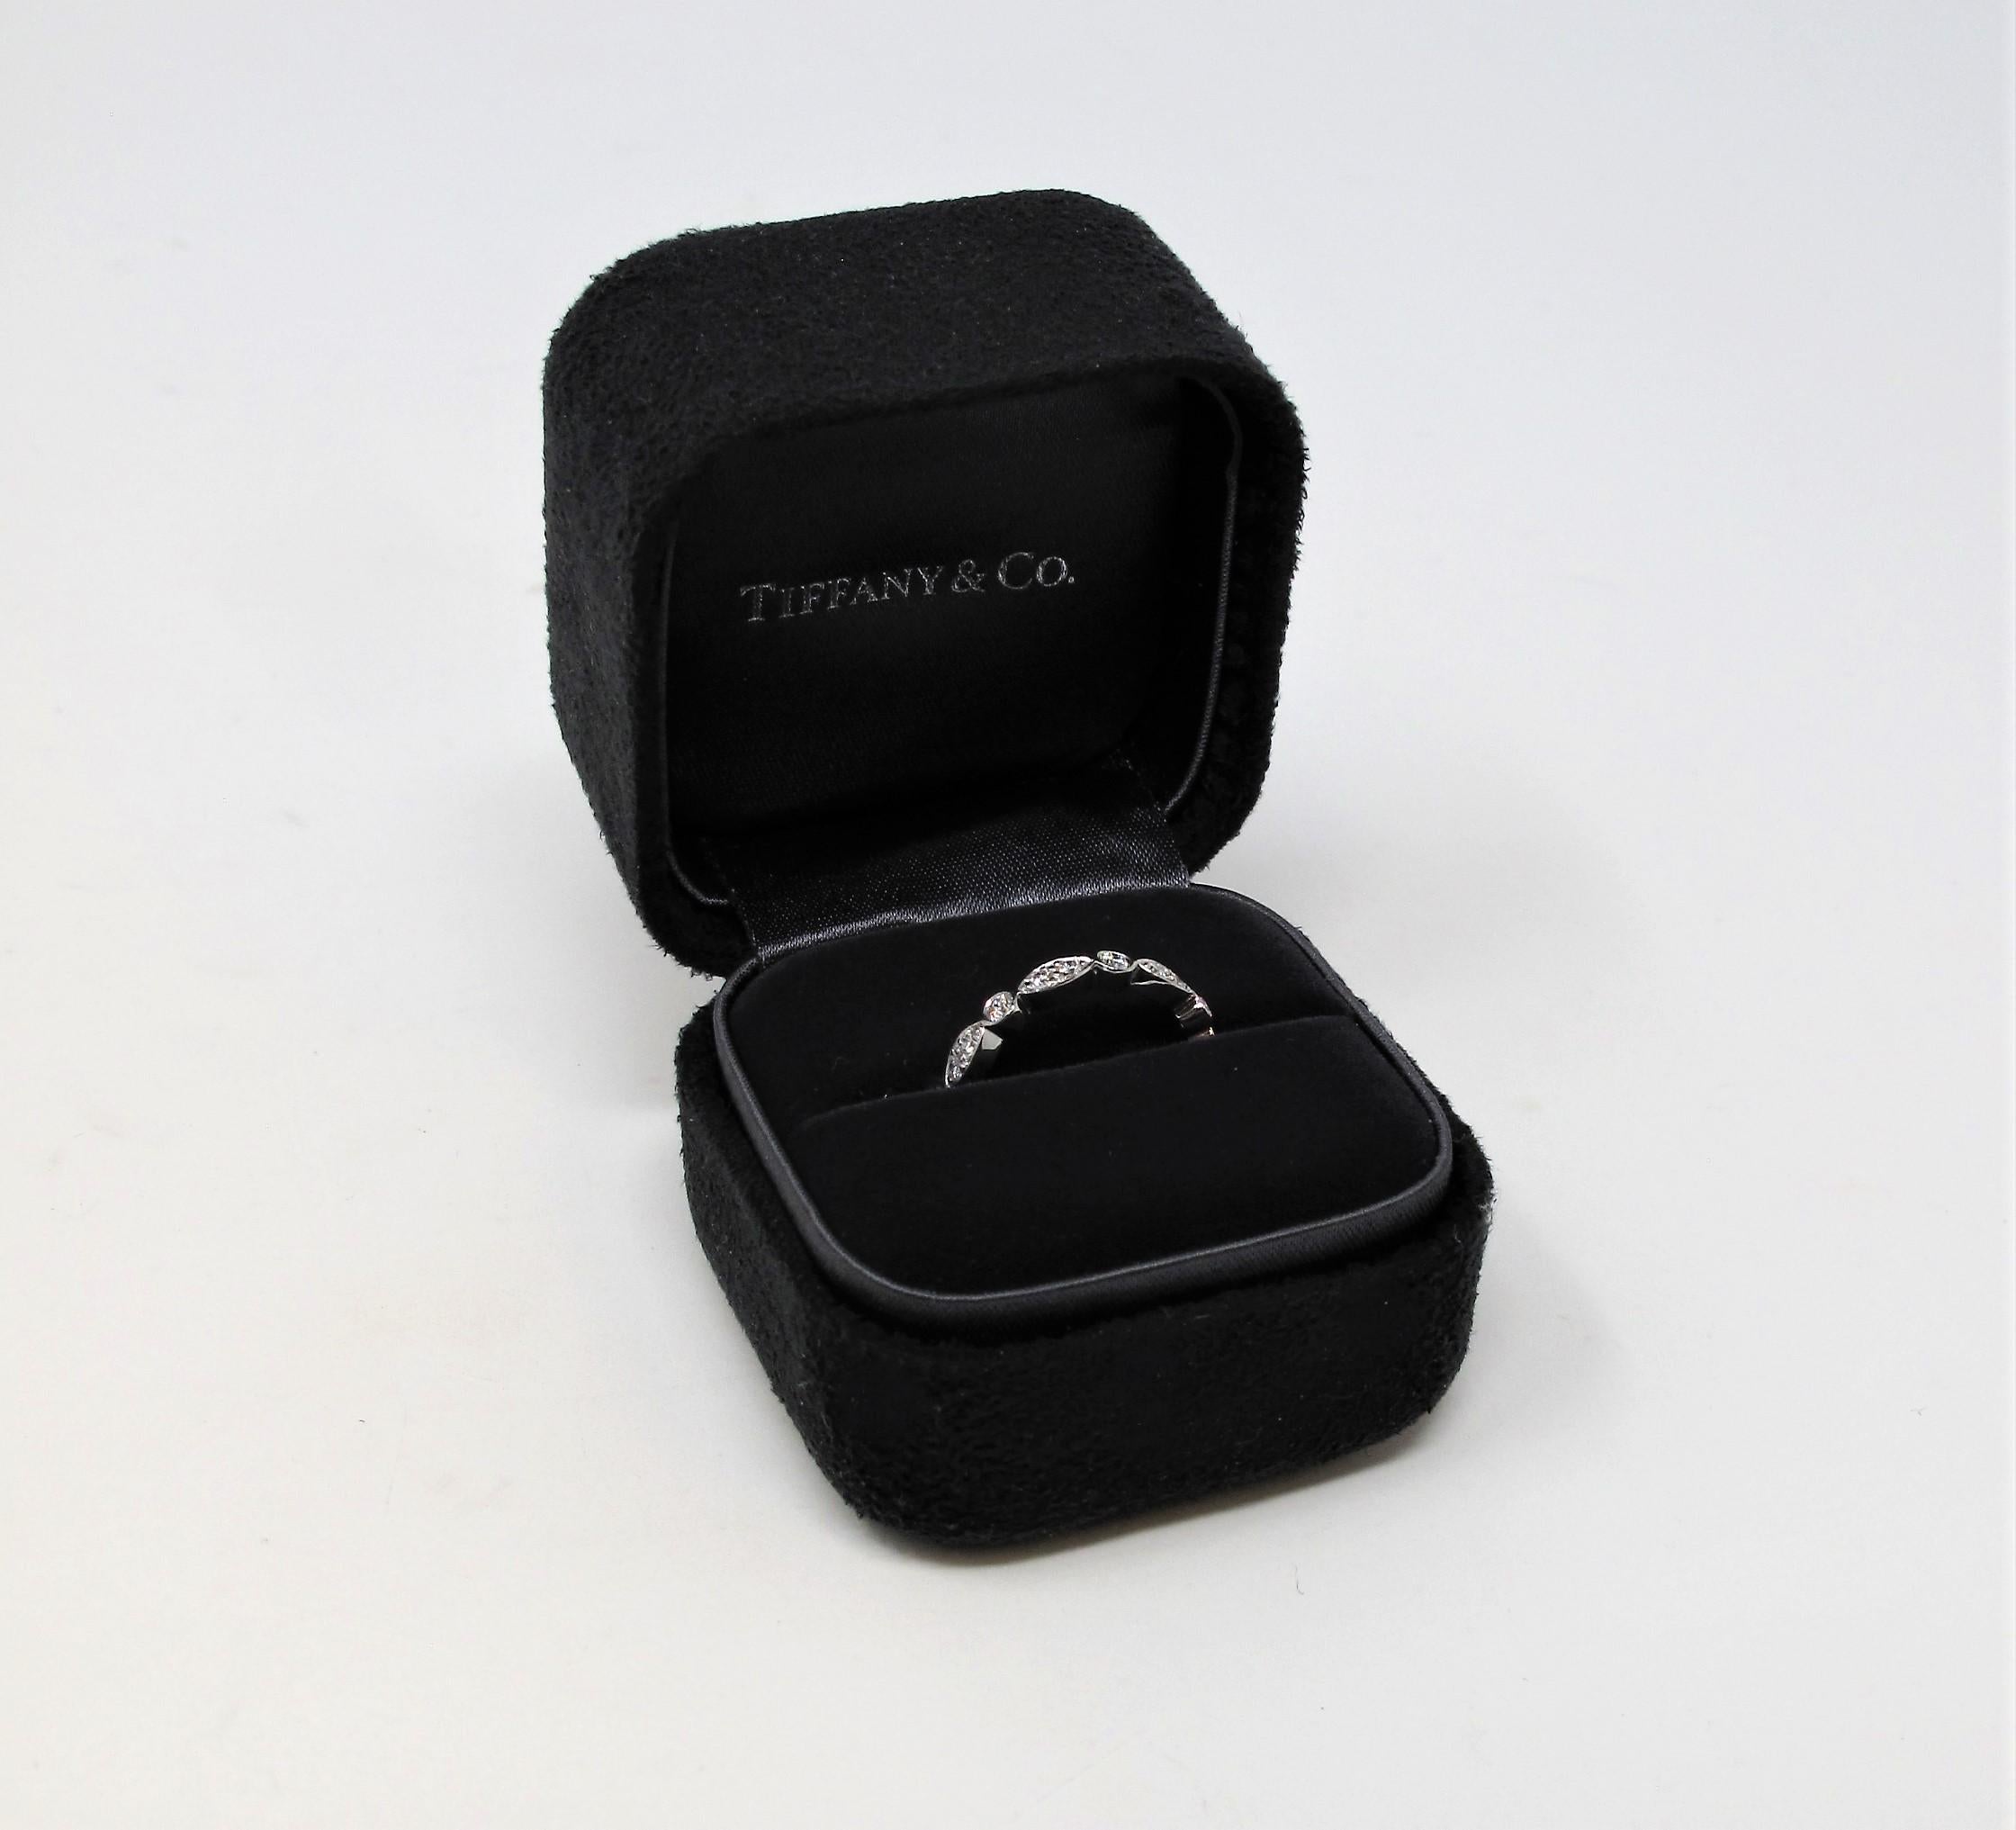 Exquisite Tiffany Jazz diamond and platinum band ring from renowned jeweler, Tiffany & Co.. This incredible ring has a vintage style charm with a modern, feminine twist.  It would be perfect paired with an engagement ring, or simply worn on its own.